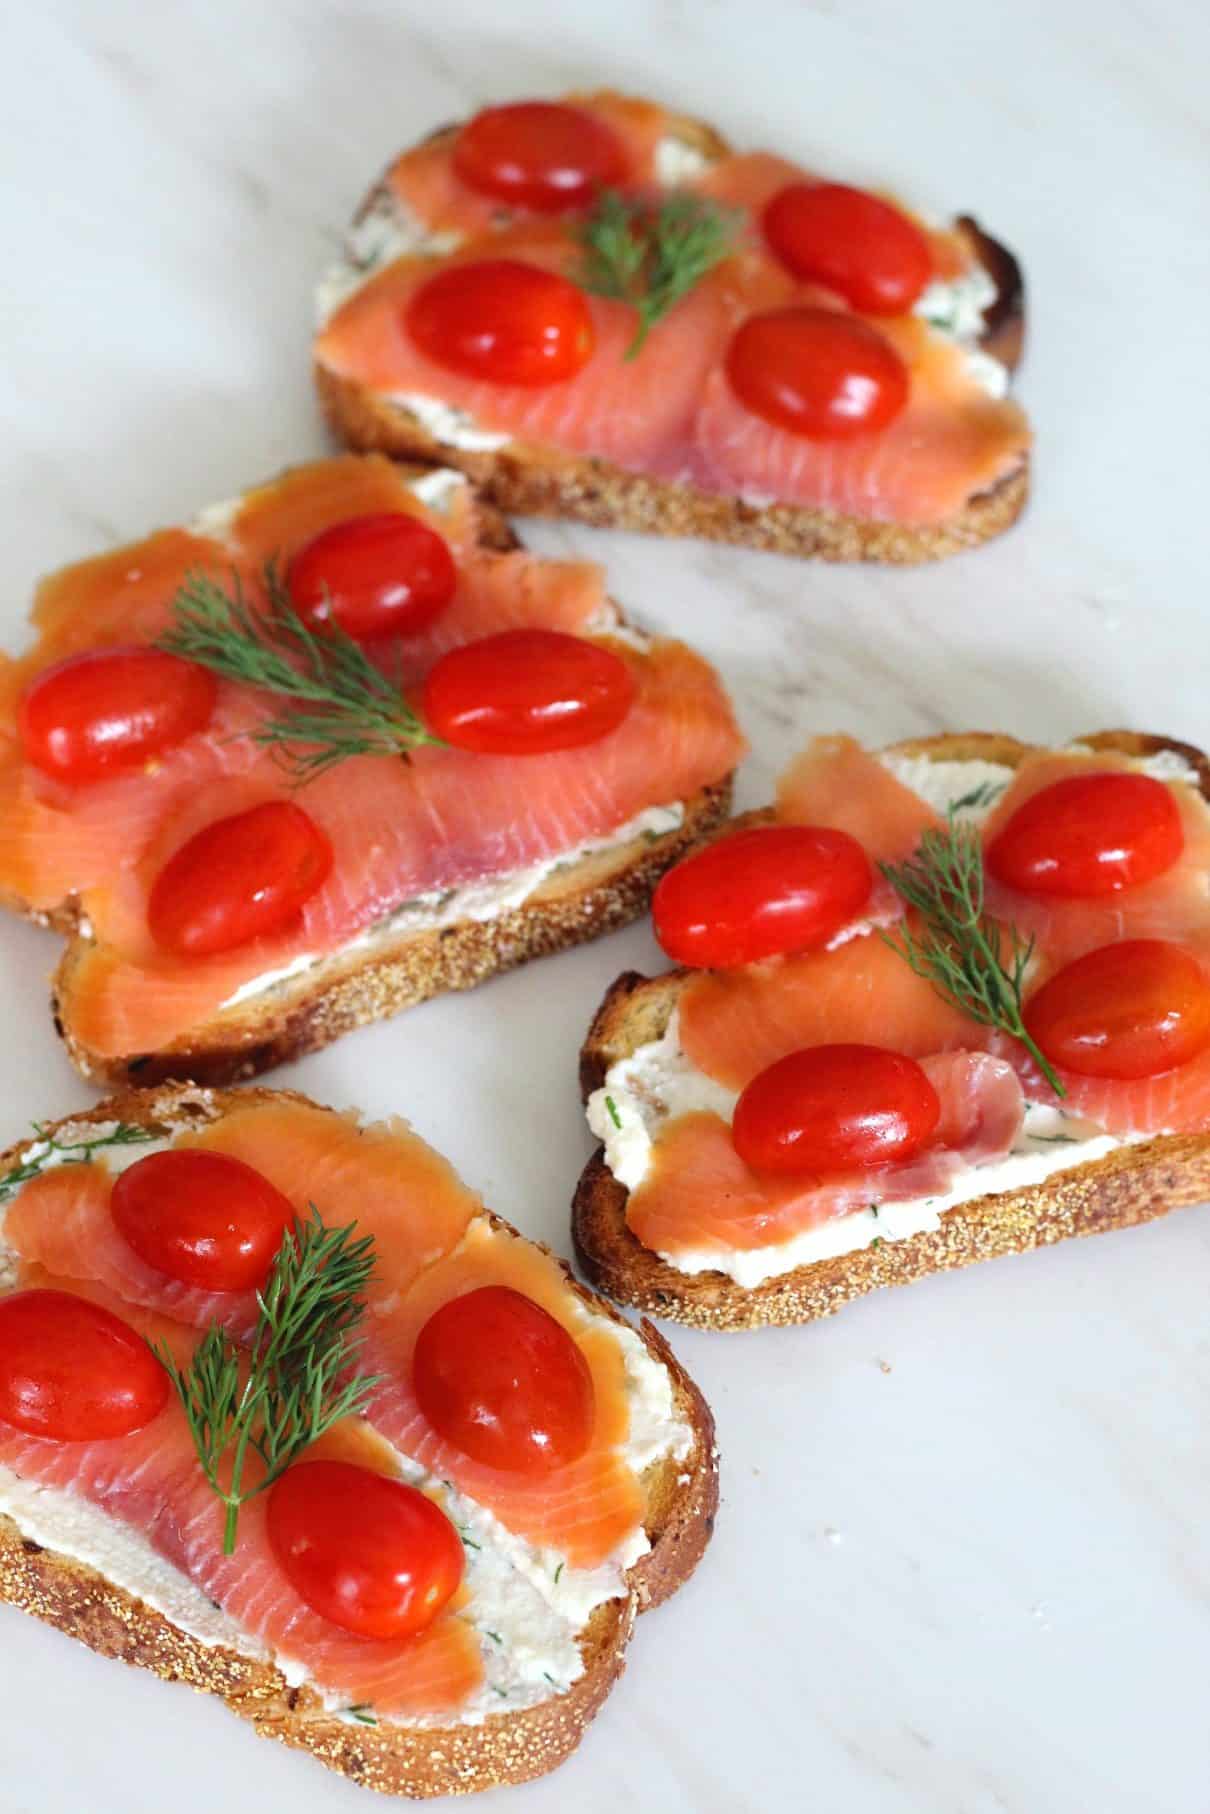 Ricotta crostini topped with smoked salmon, cherry tomatoes, dill and olive oil. This picture shows 4 crostini at different angles